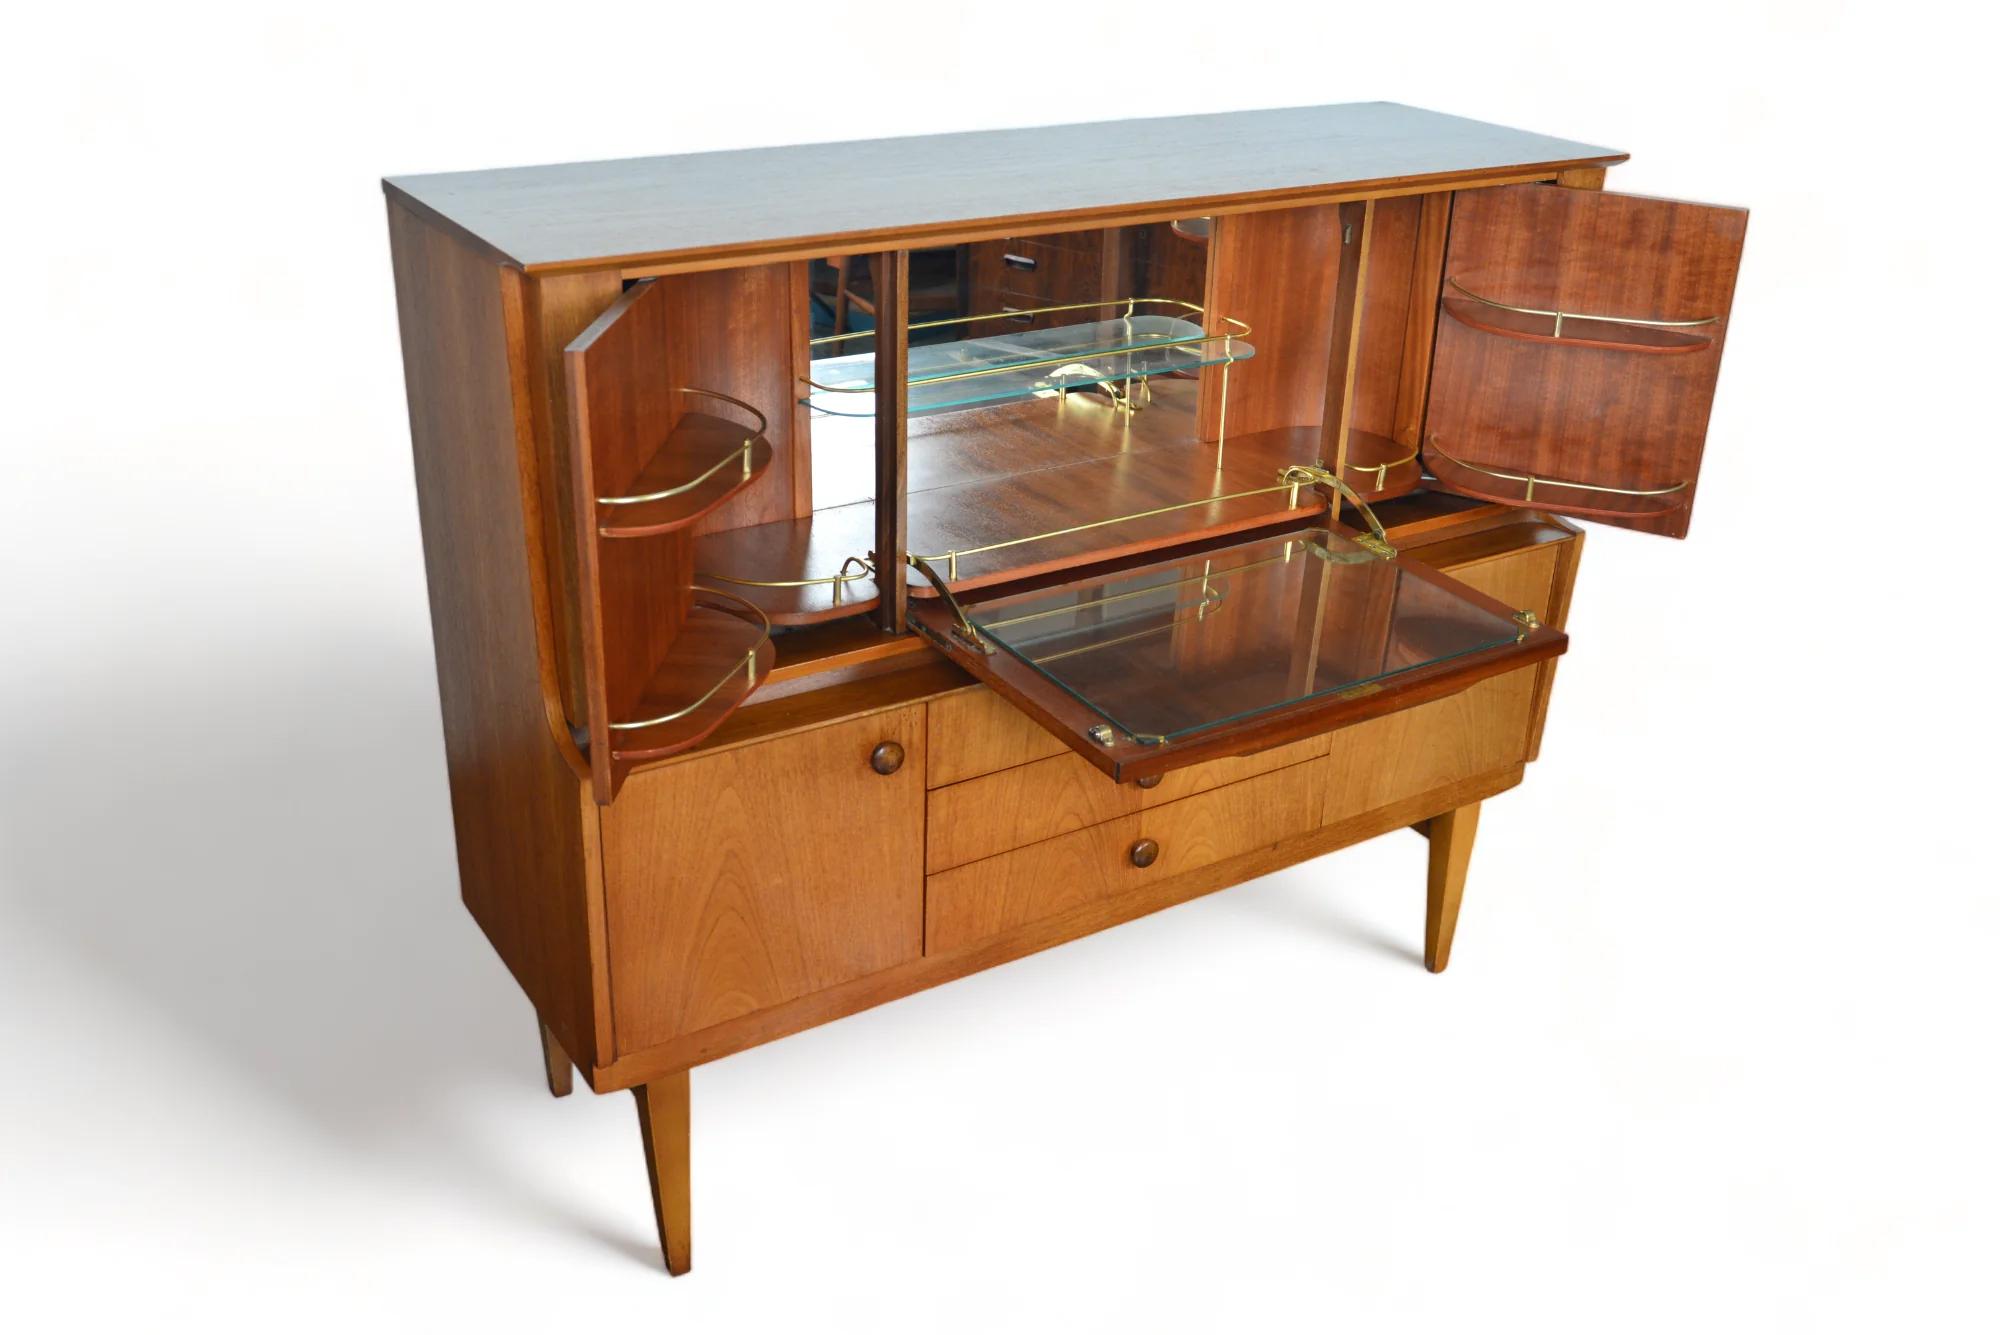 English Modern Cocktail Cabinet In Teak With Fold Out Bar 3